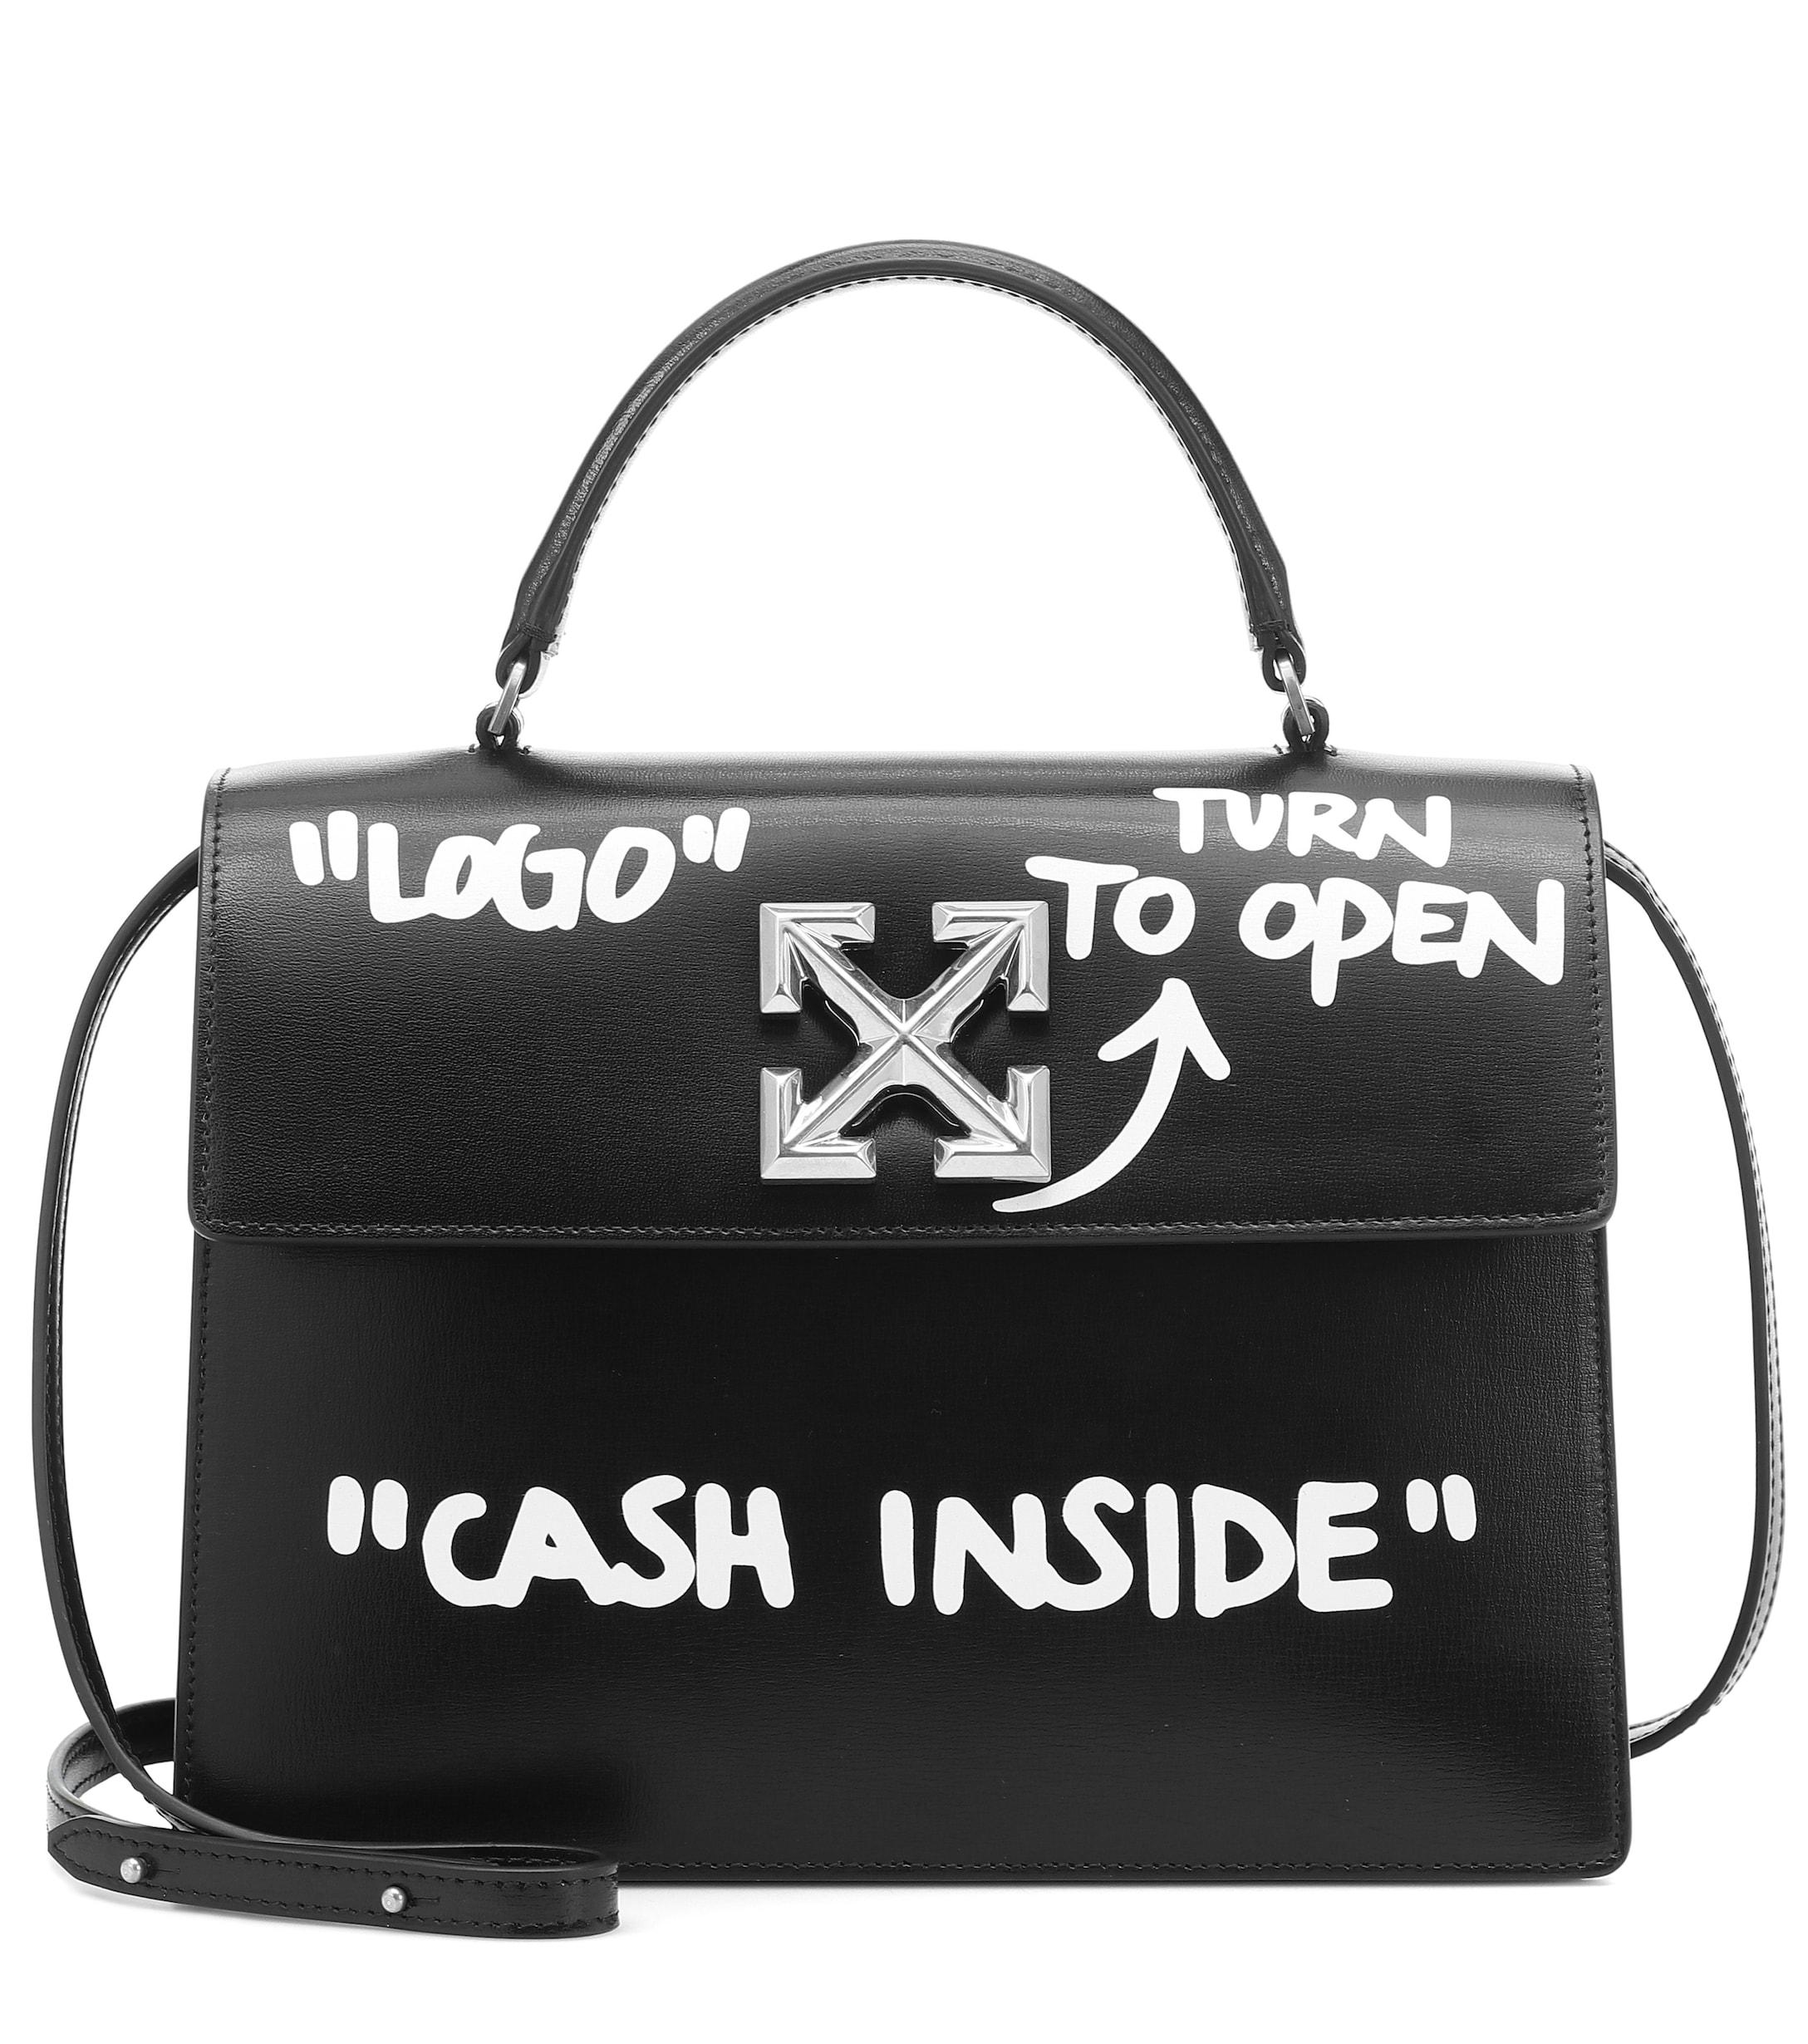 Jitney Small Leather Shoulder Bag in Black - Off White